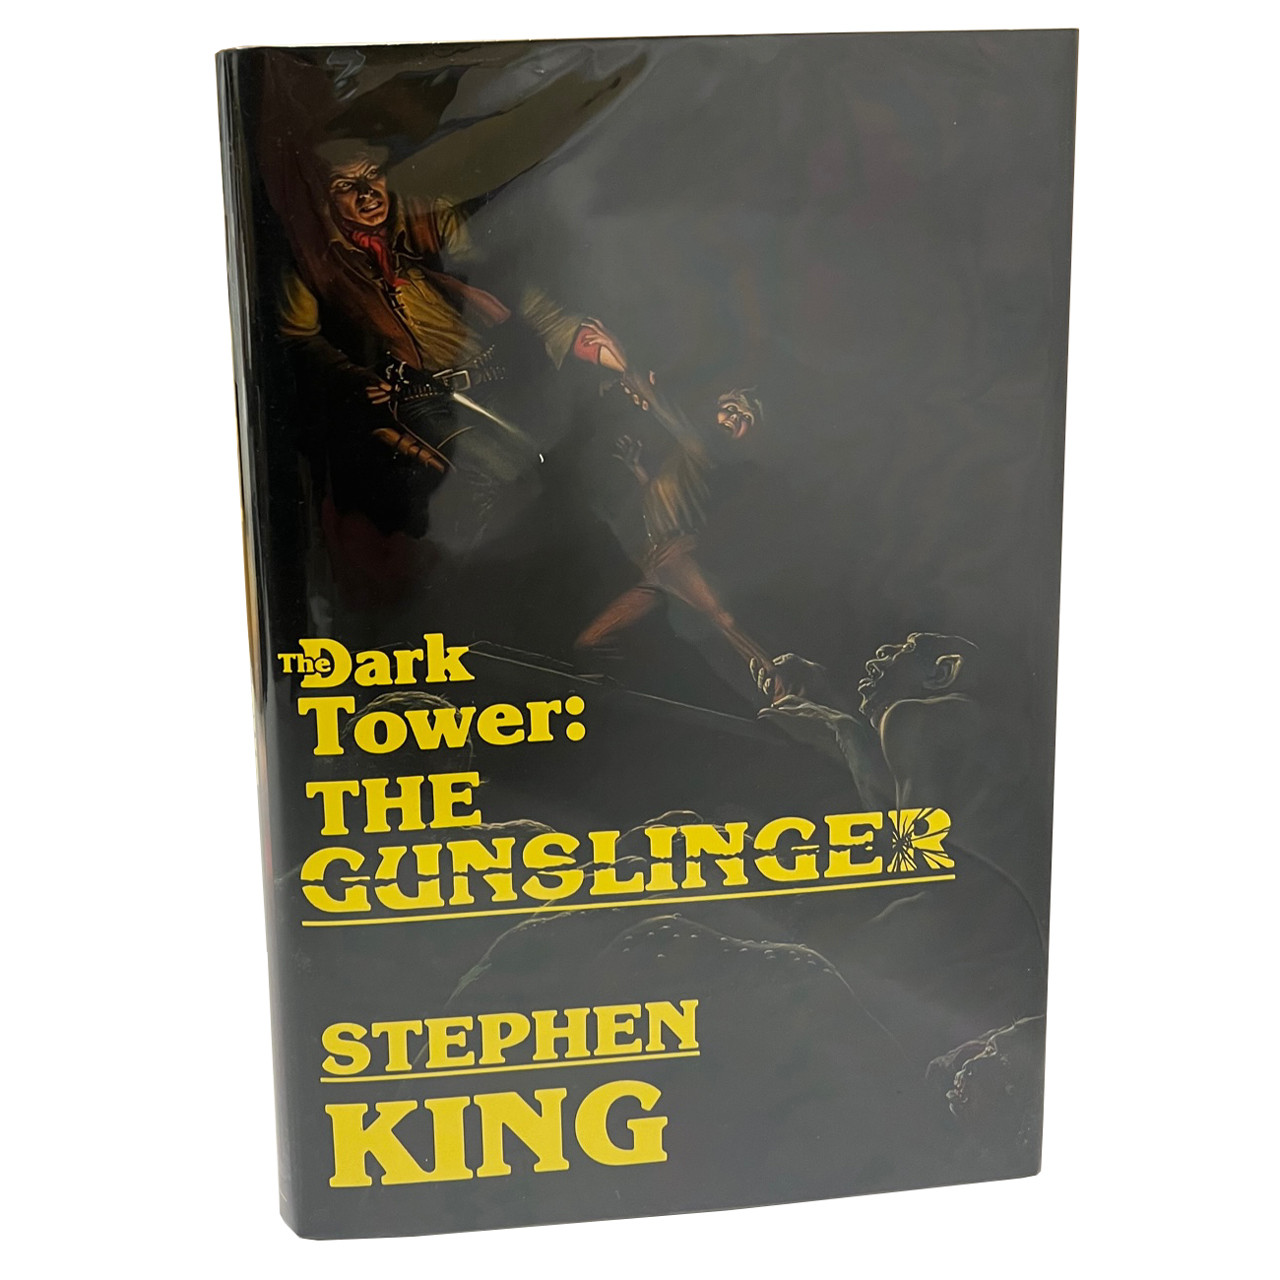 Stephen King "The Dark Tower: The Gunslinger" Signed First Edition, First Printing, Slipcased w/COA